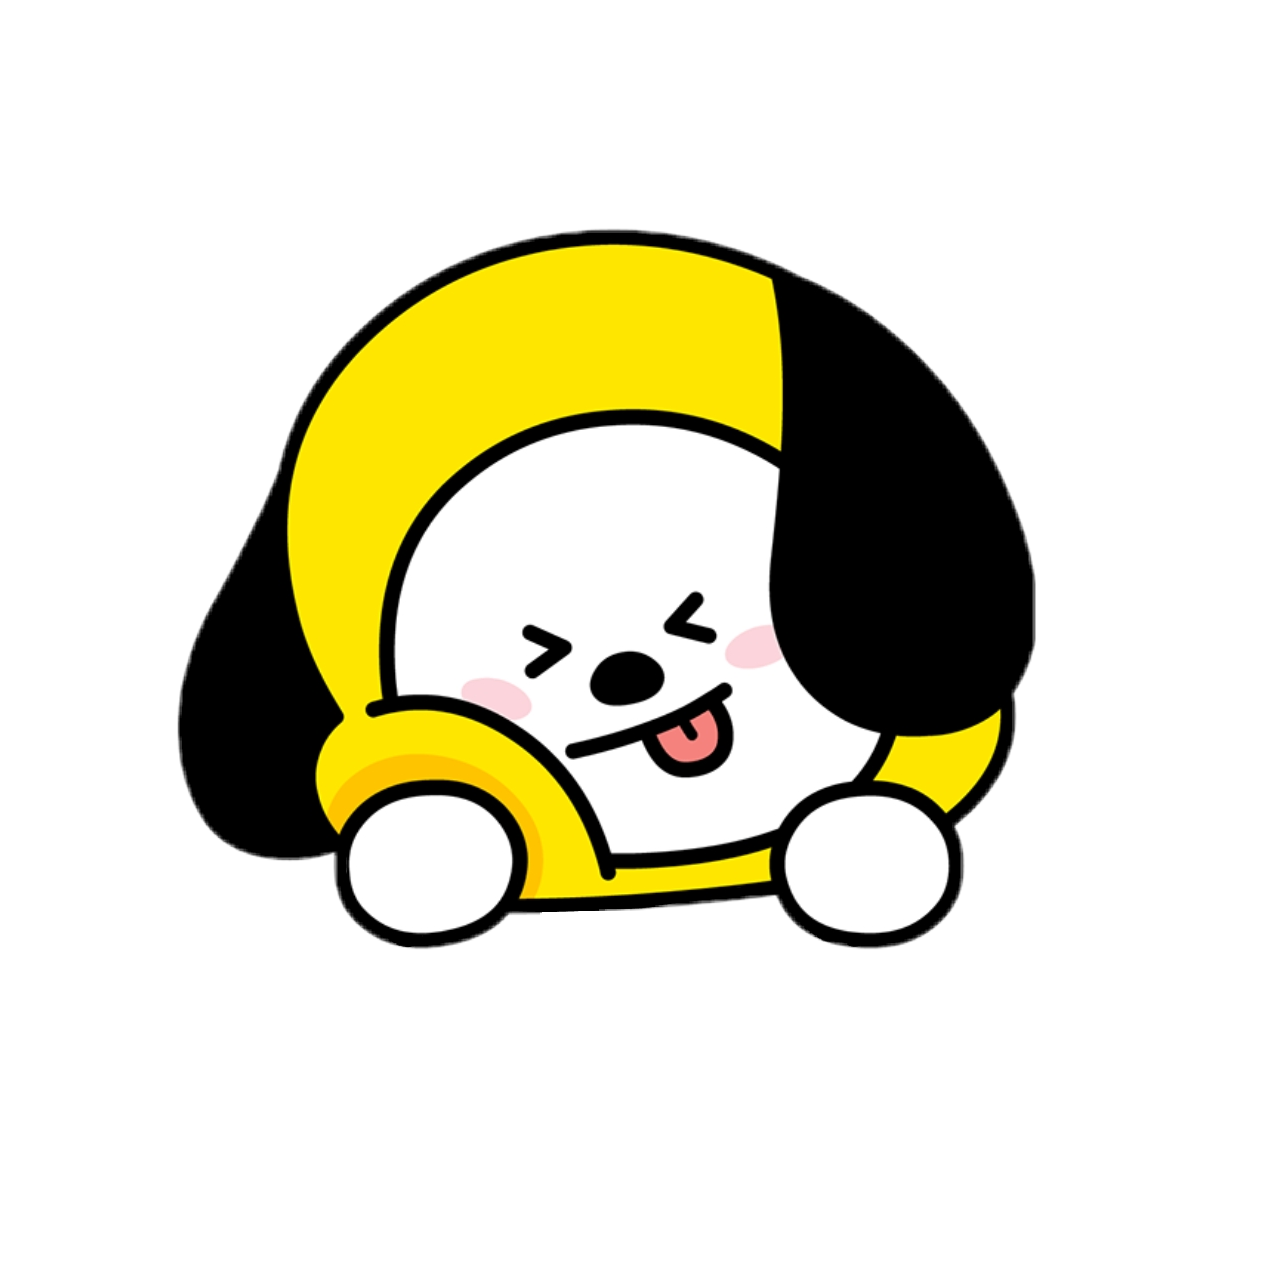 Emoticon Sticker Smiley Wings Bts Free PNG HQ PNG Image